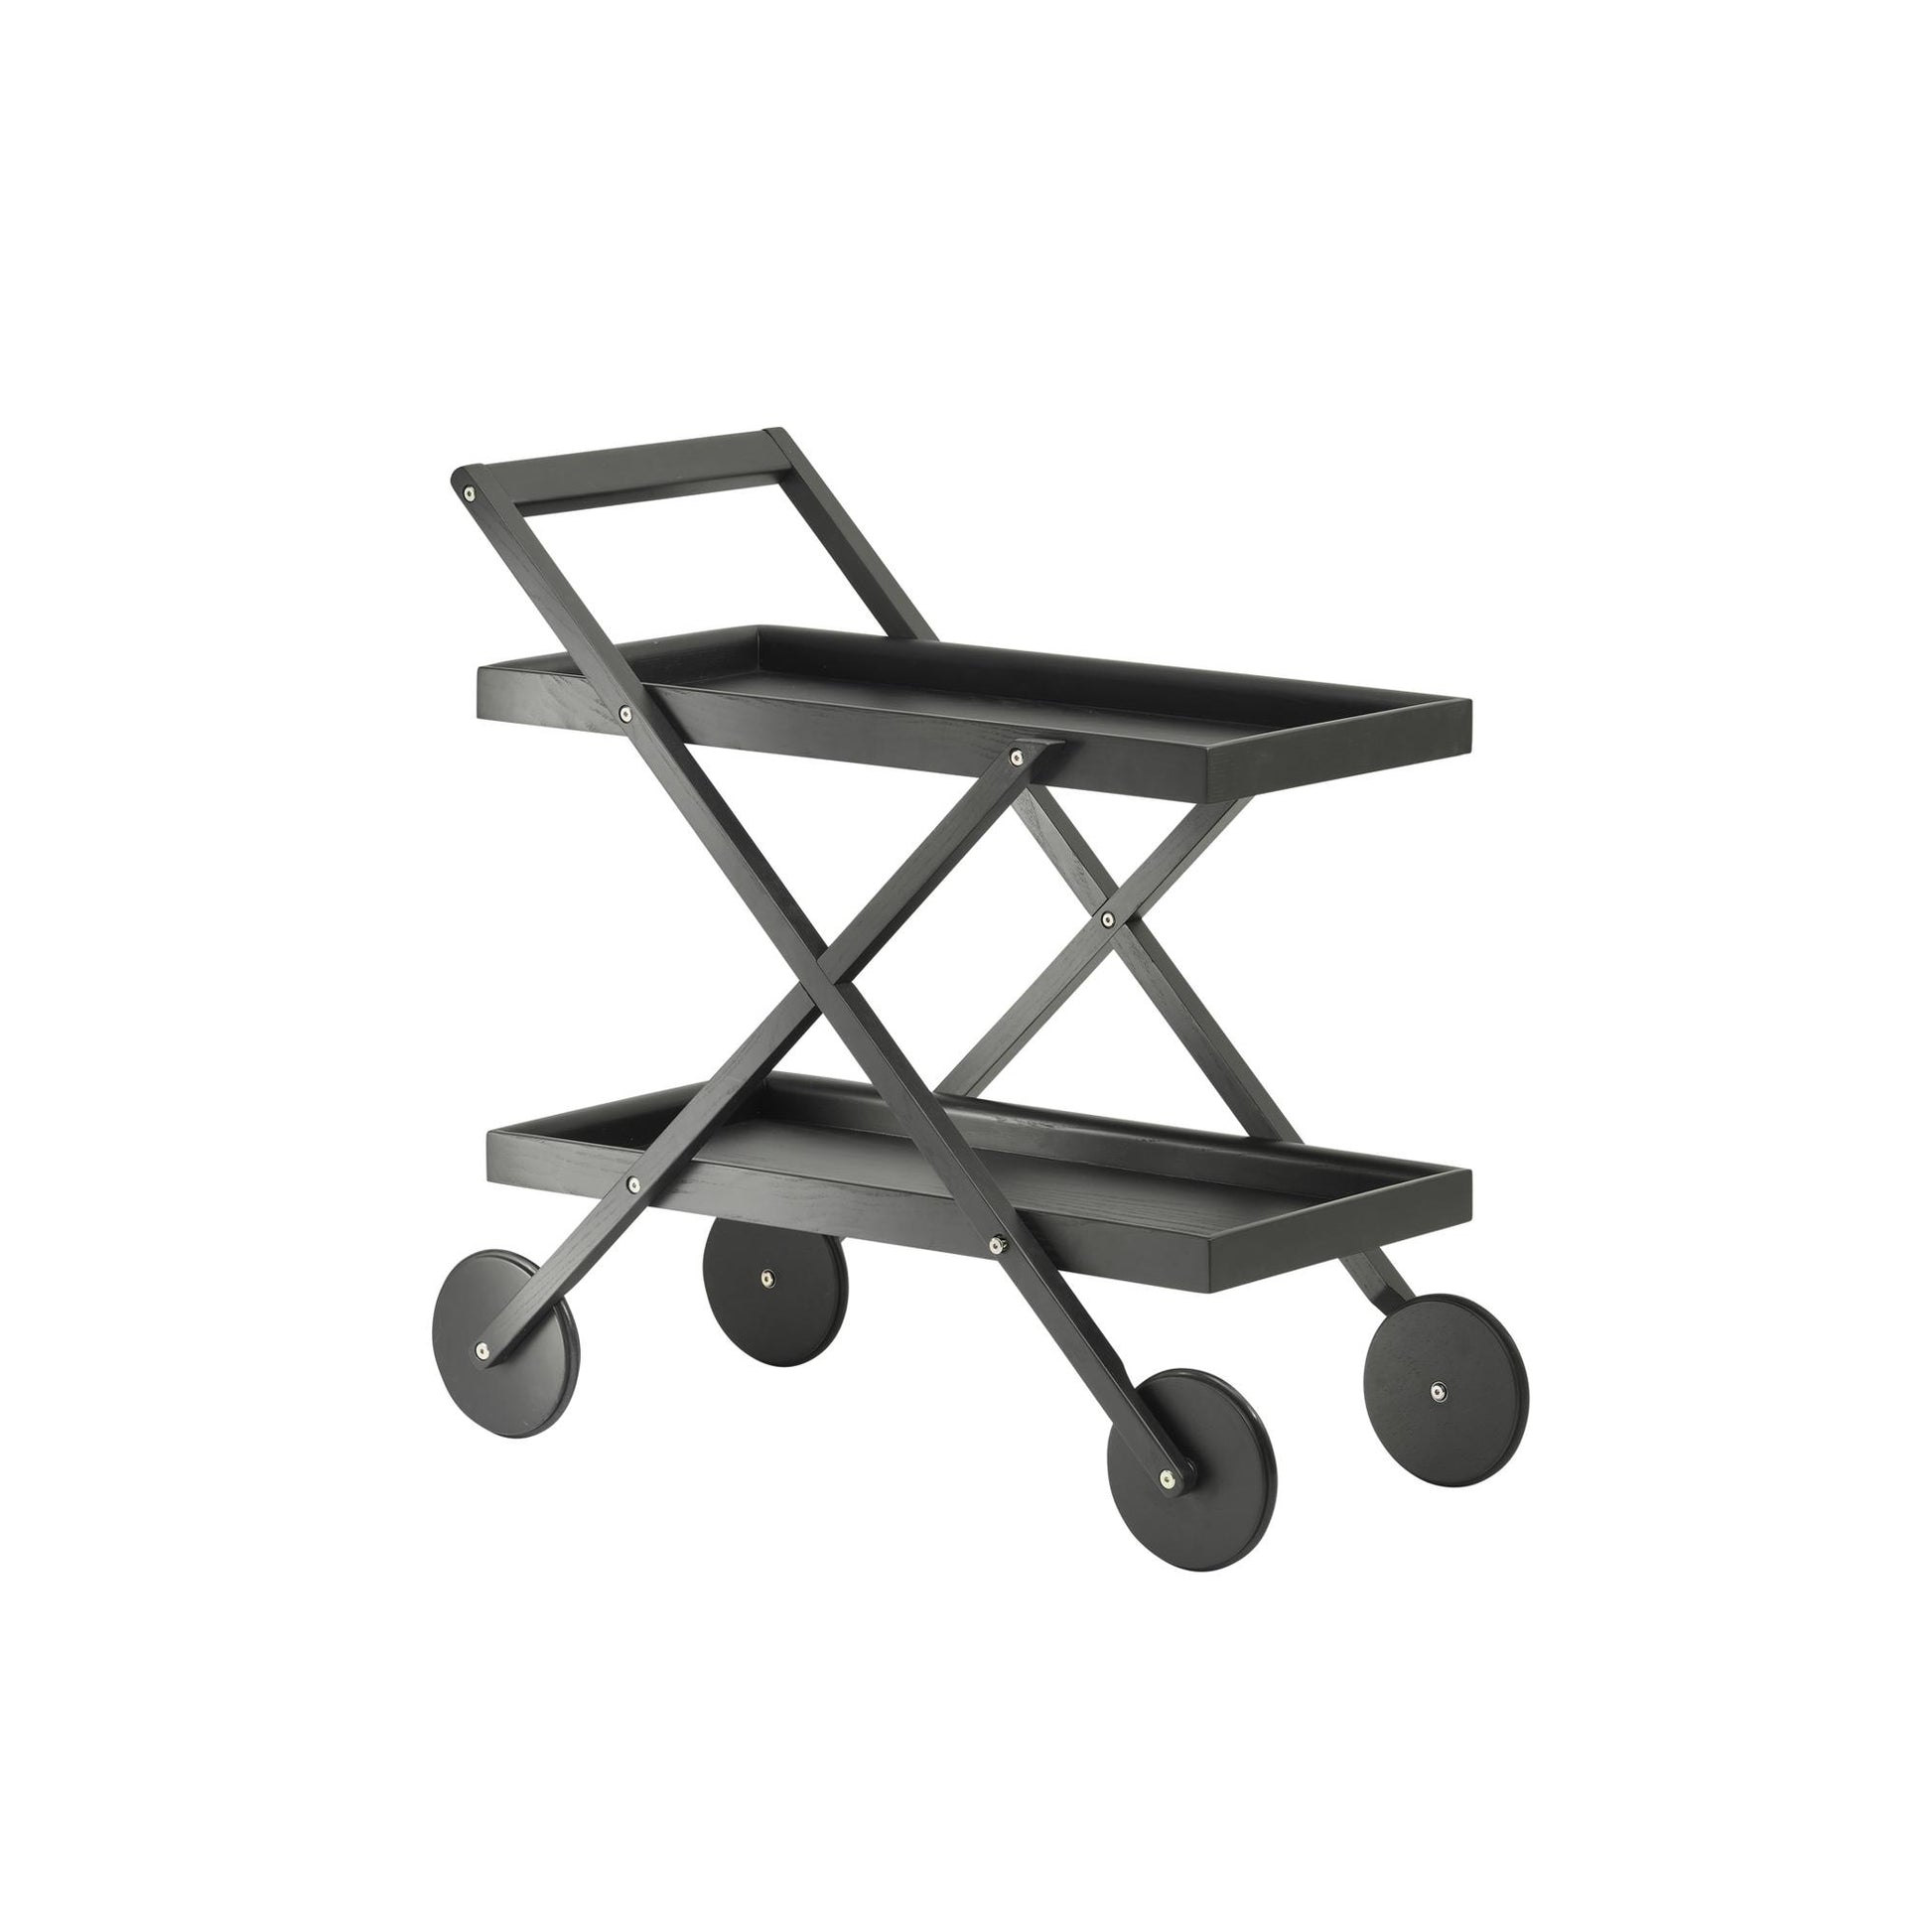 Exit Trolley by Design House Stockholm #Black